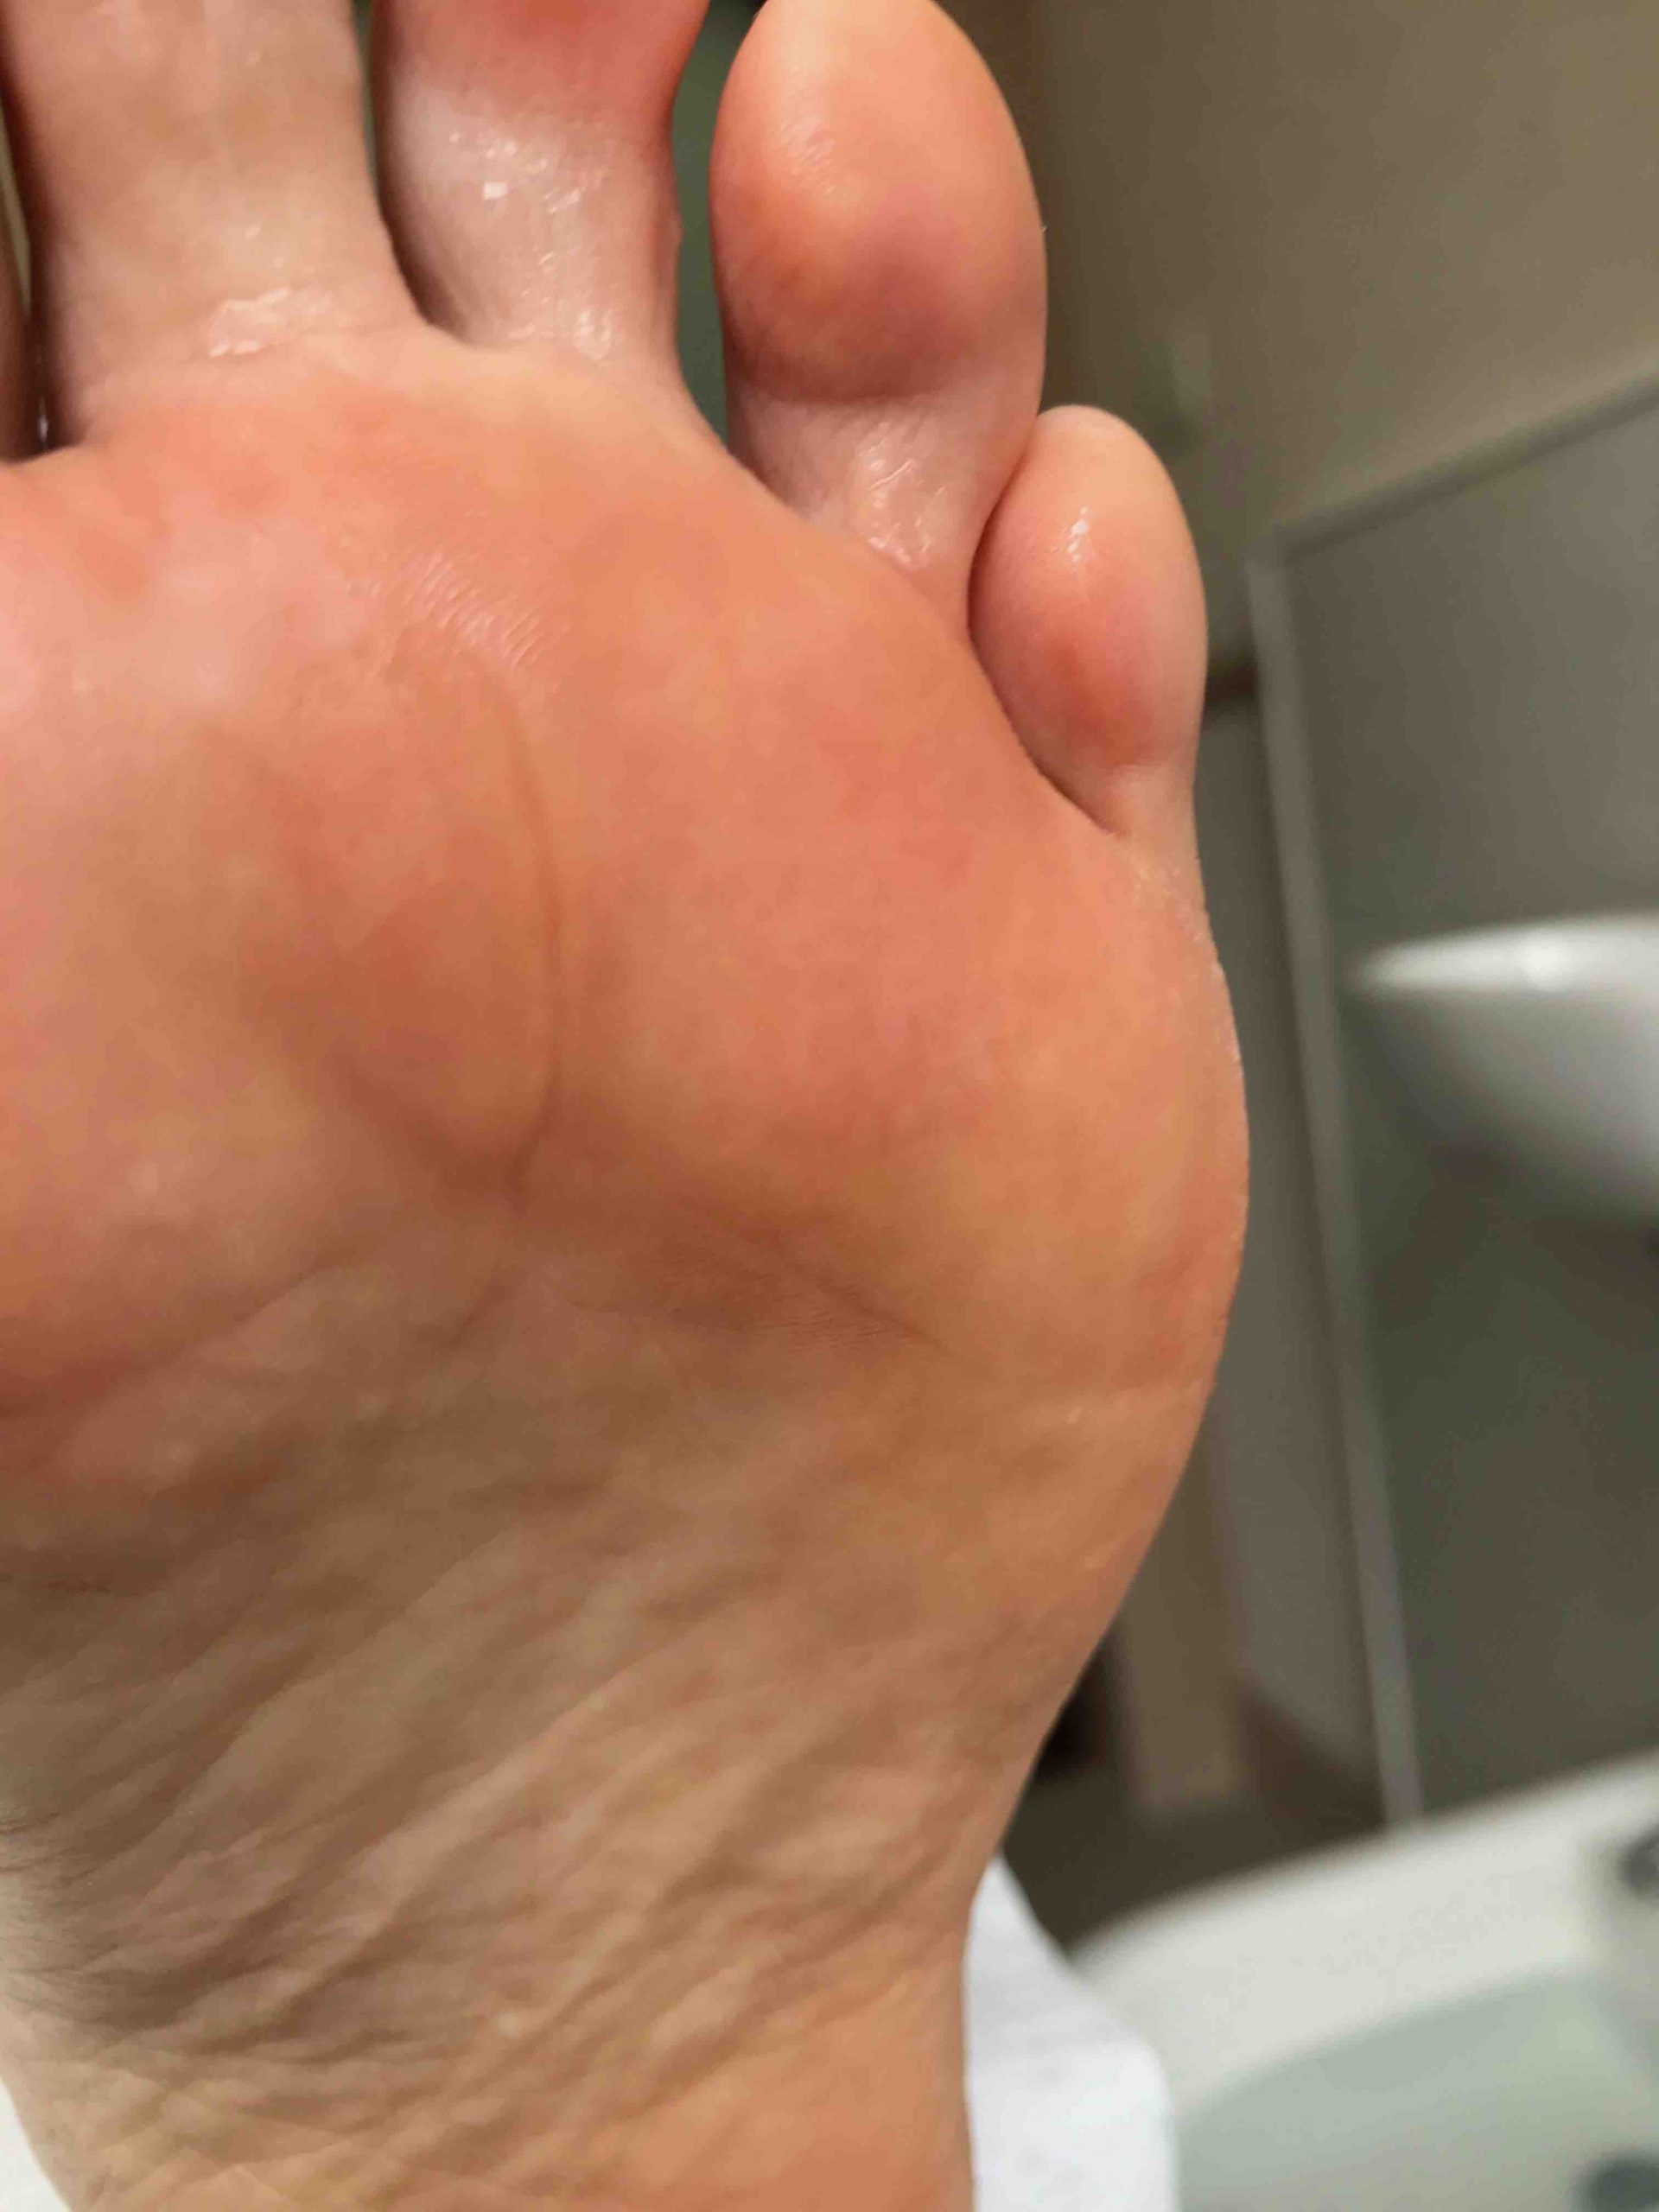 Case study: The painful verruca that proved no match for  Beauchamp Foot Care